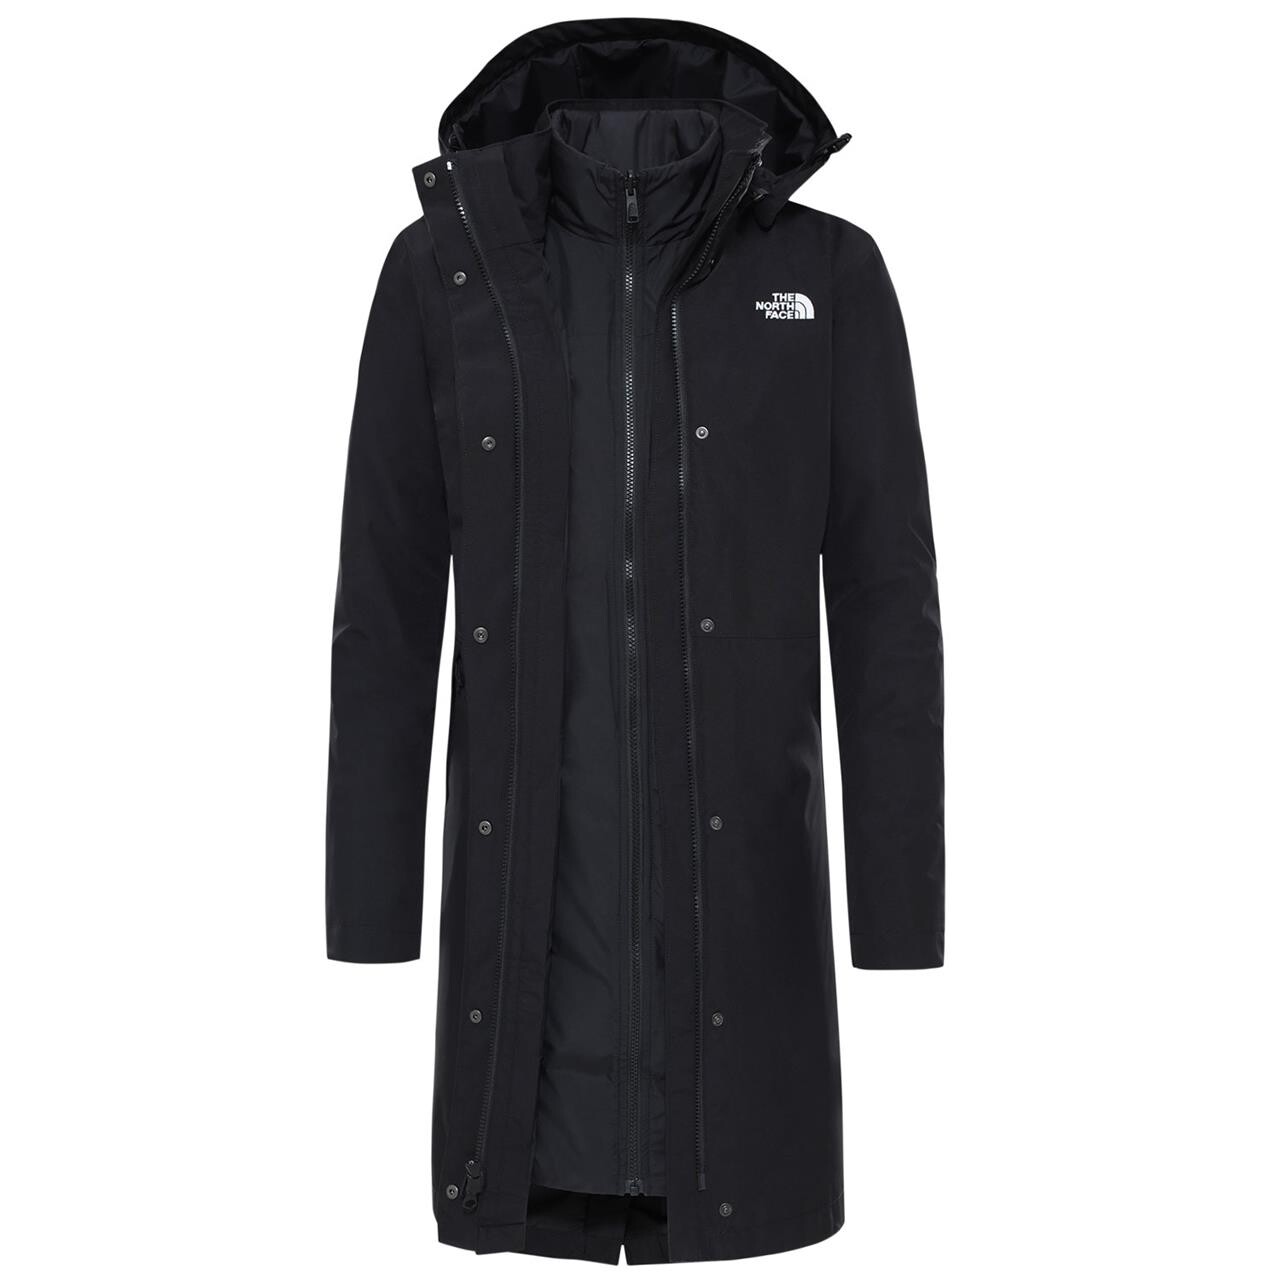 Billede af The North Face Womens Recycled Suzanne Triclimate Jacket (Sort (TNF BLACK/TNF BLACK) Medium)